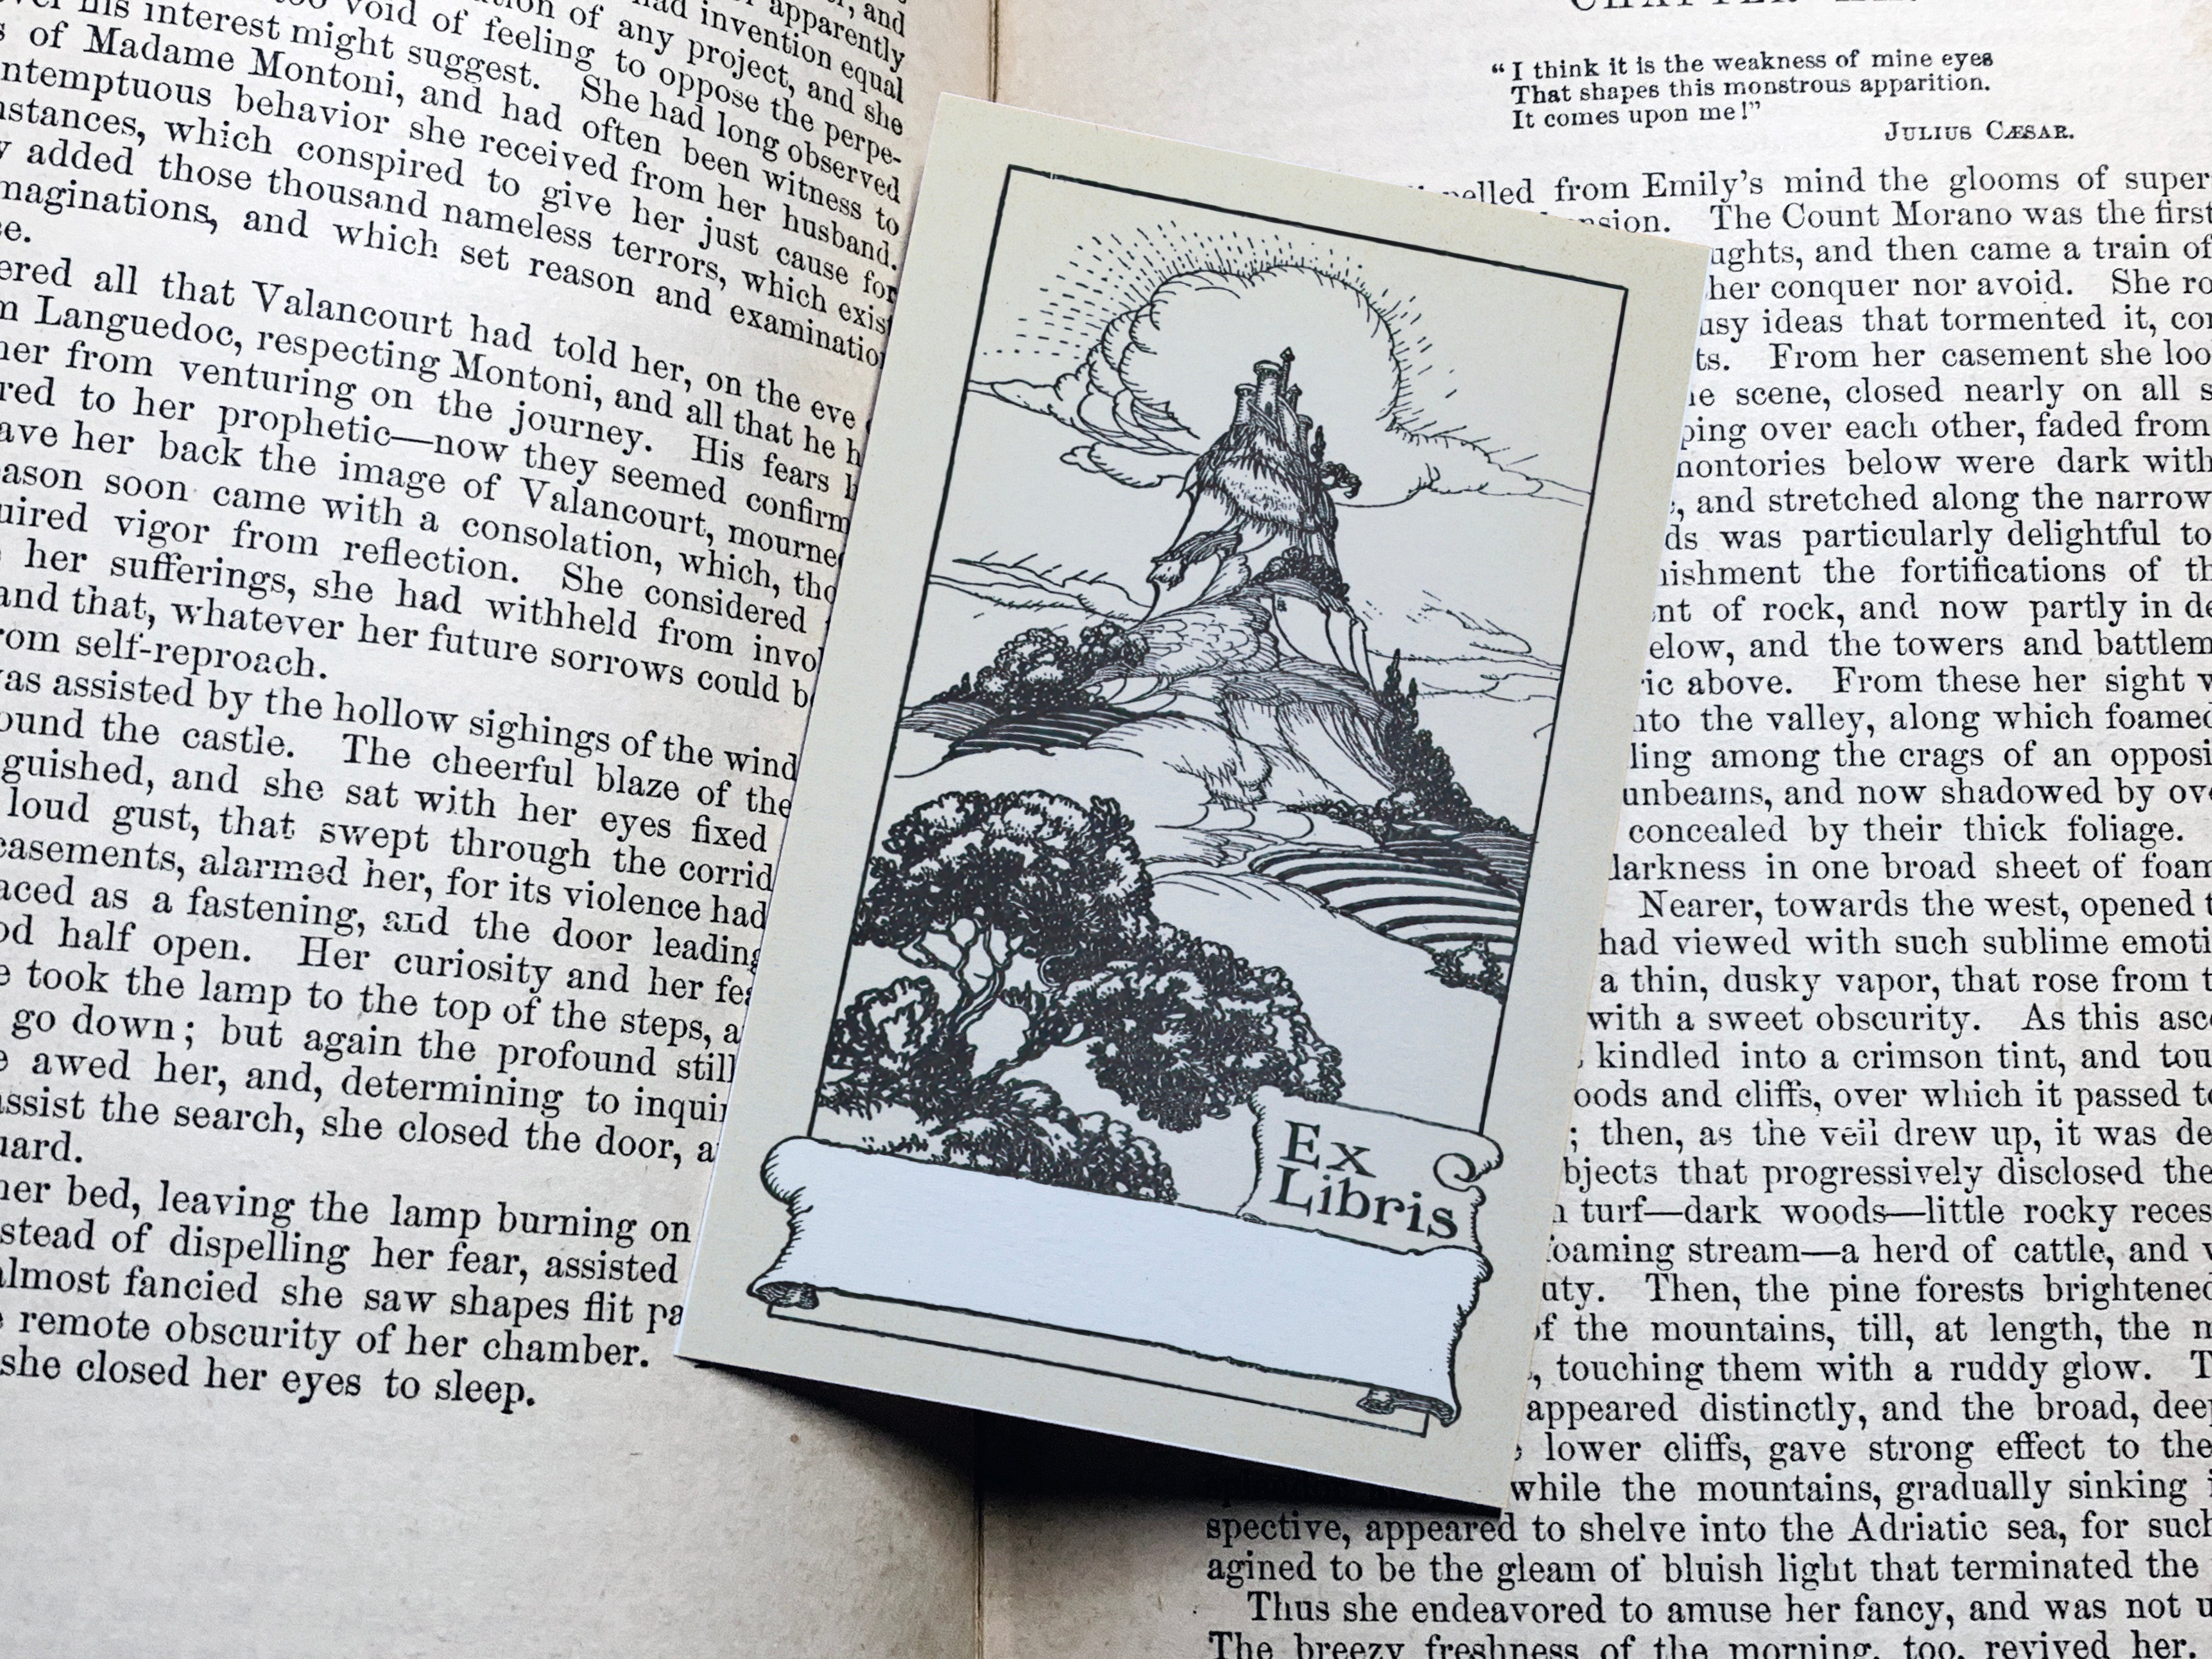 Shining Castle on the Hill, Personalized Ex-Libris Bookplates, Crafted on Traditional Gummed Paper, 2.5in x 4in, Set of 30